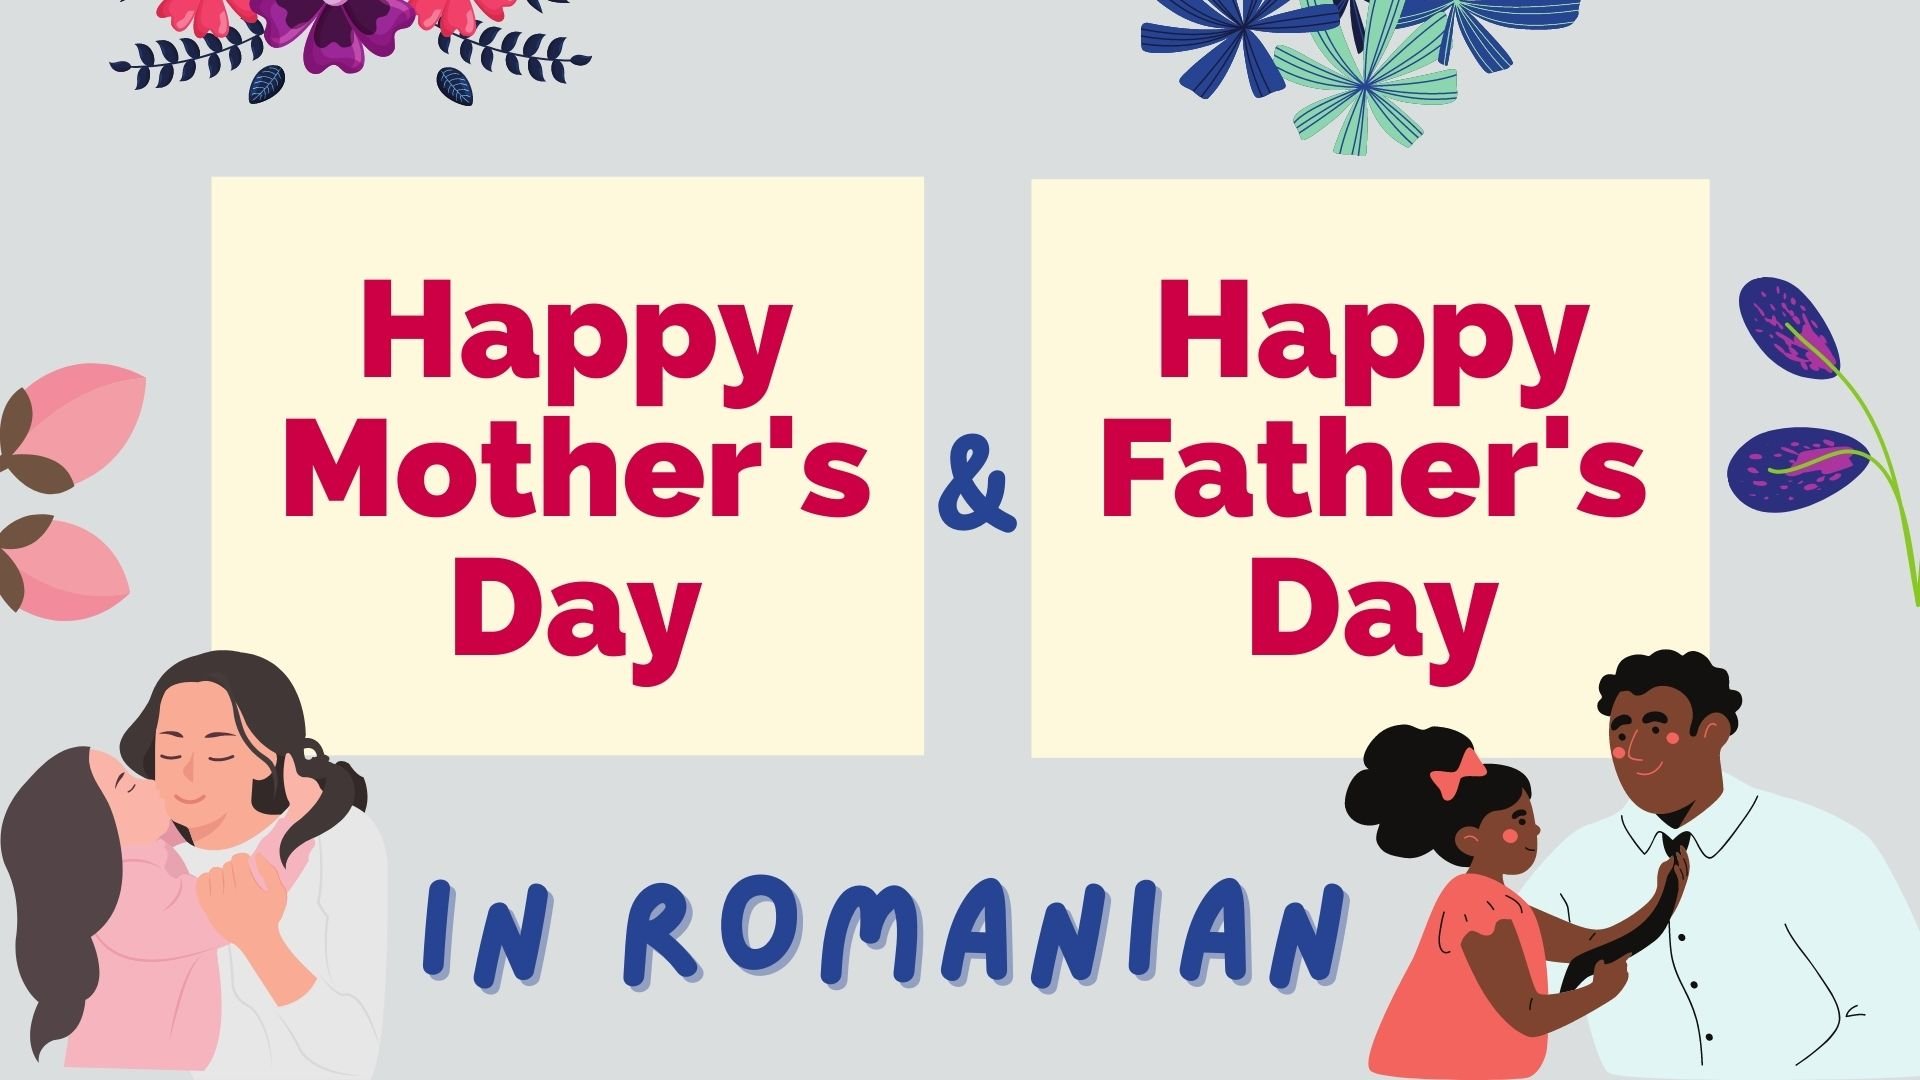 How To Say Happy Mother’s Day And Father’s Day In Romanian Lingalot